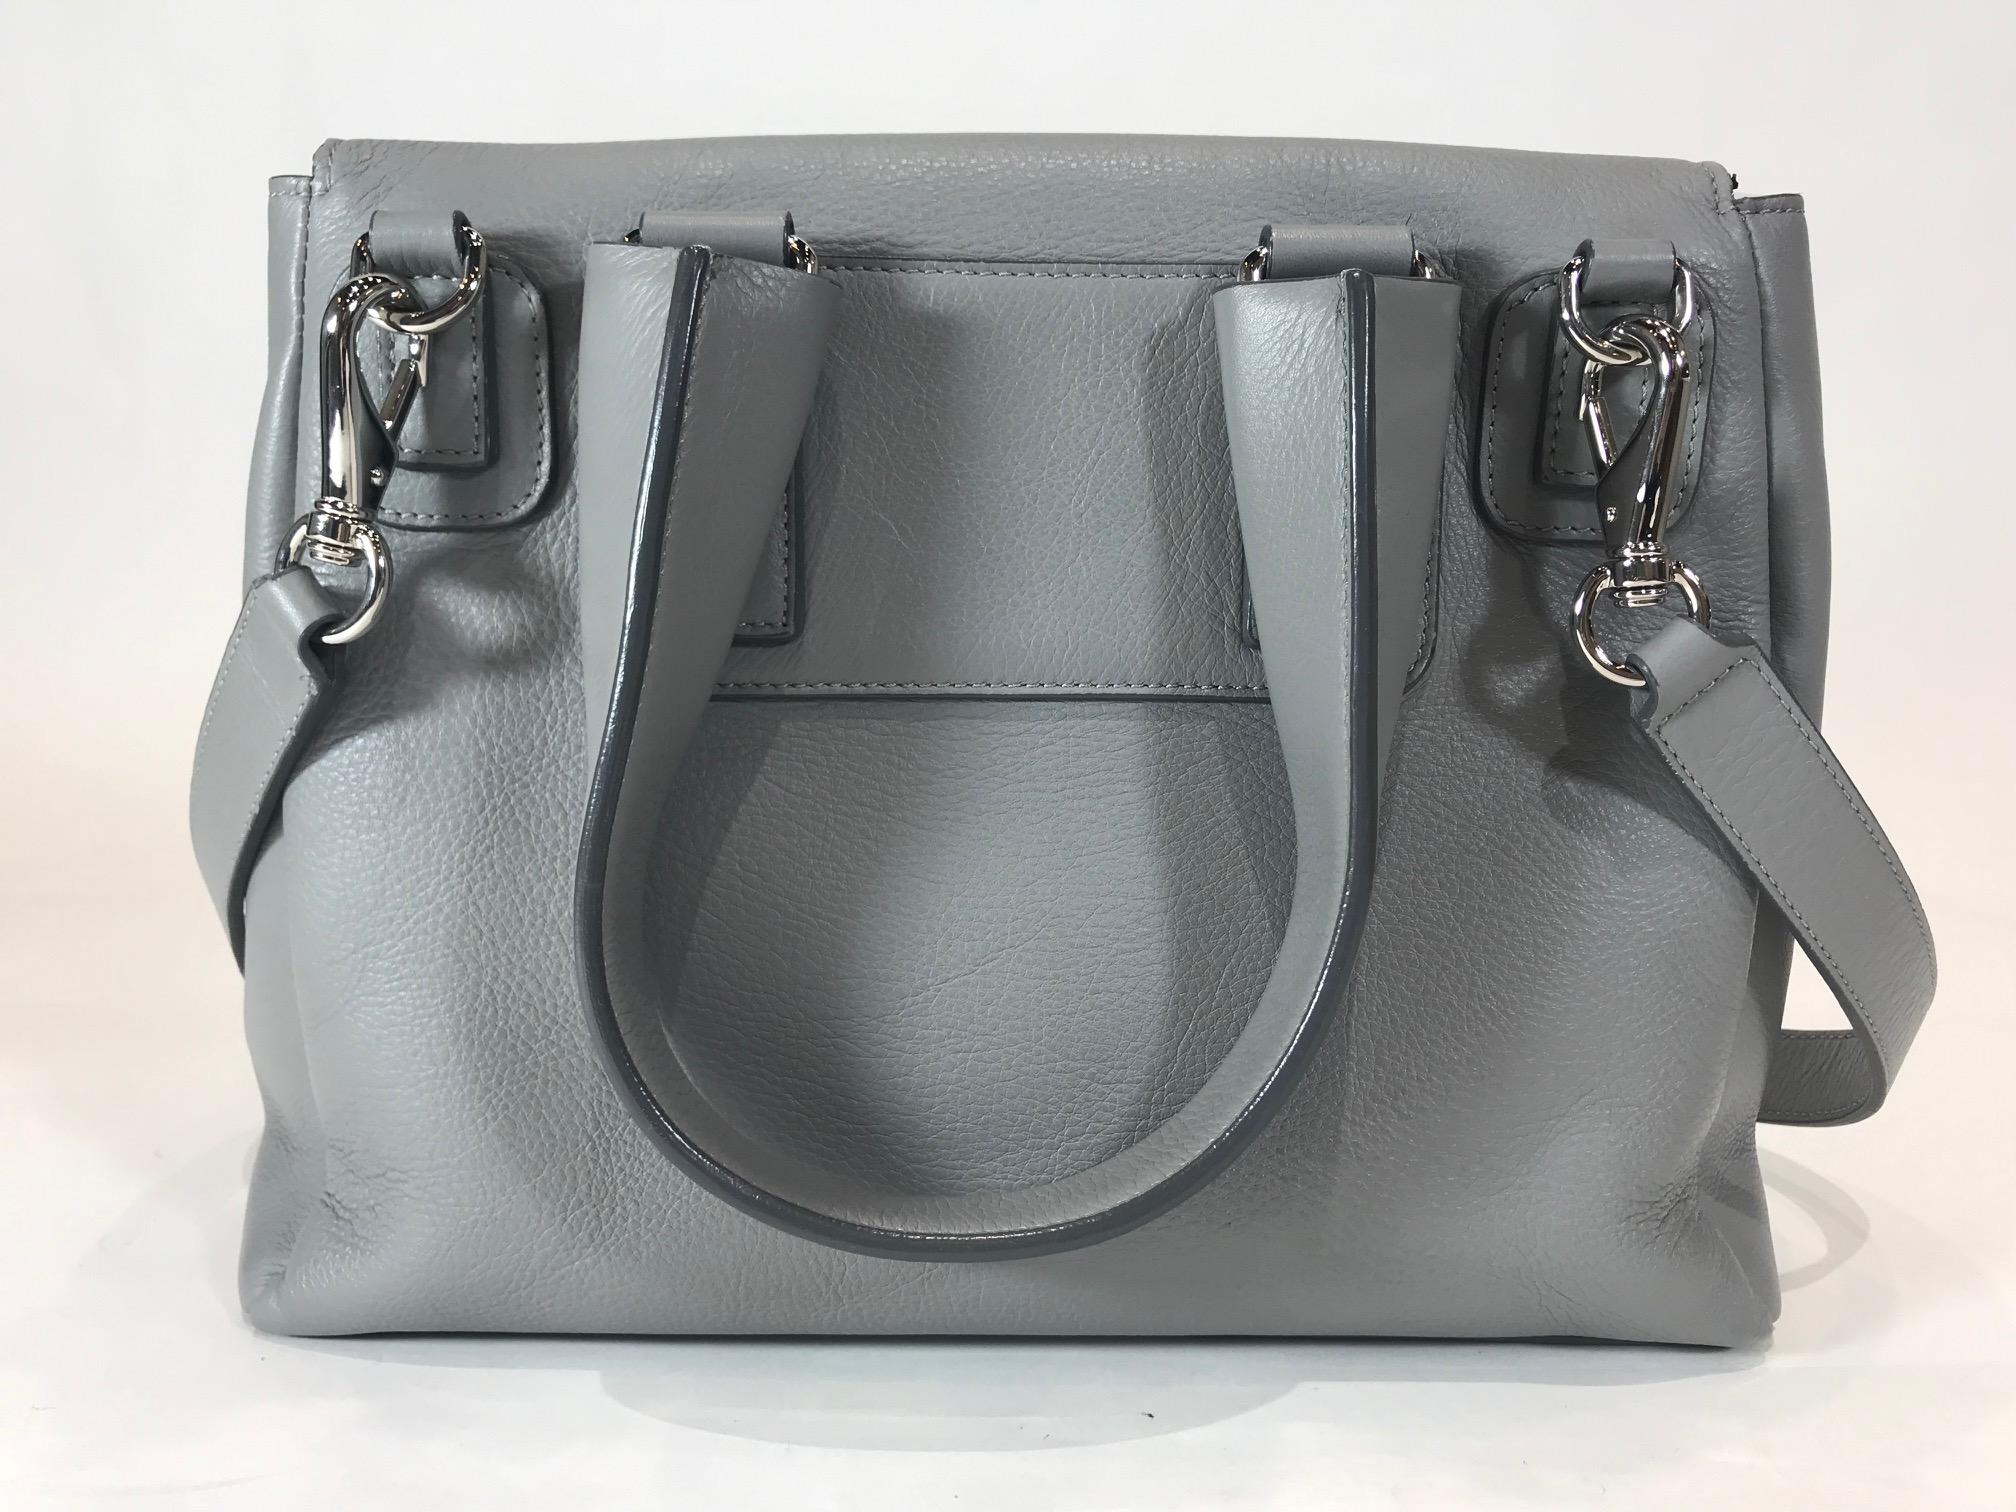 Givenchy Small Pandora Pure Satchel In Excellent Condition For Sale In Roslyn, NY